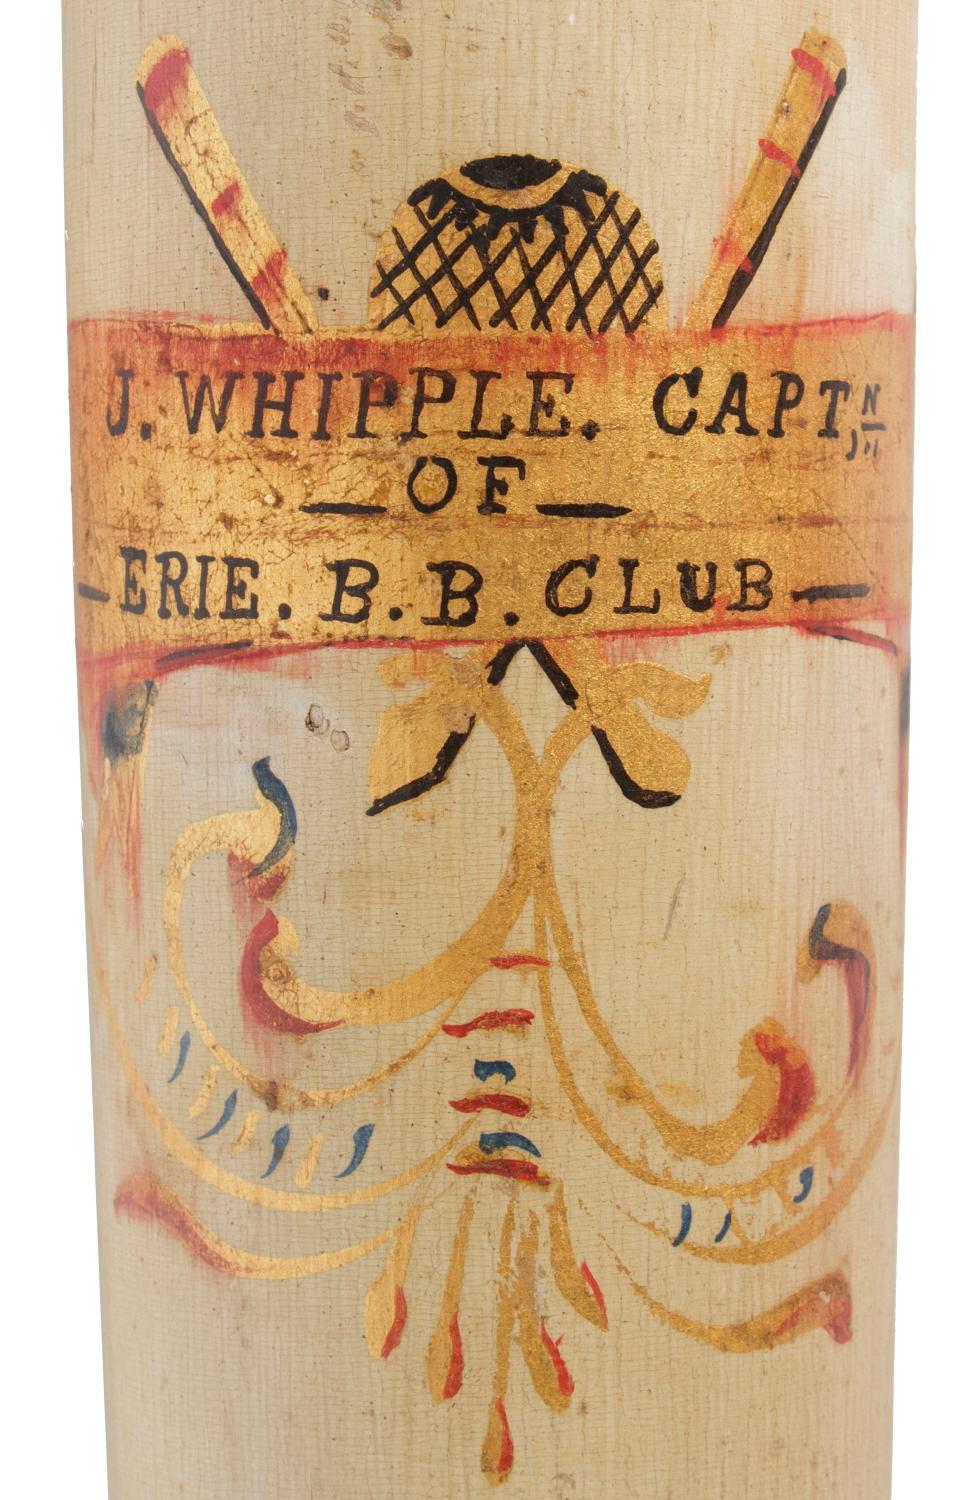 American Oversized, Paint-Decorated Baseball Bat Presented to J. Whipple For Sale